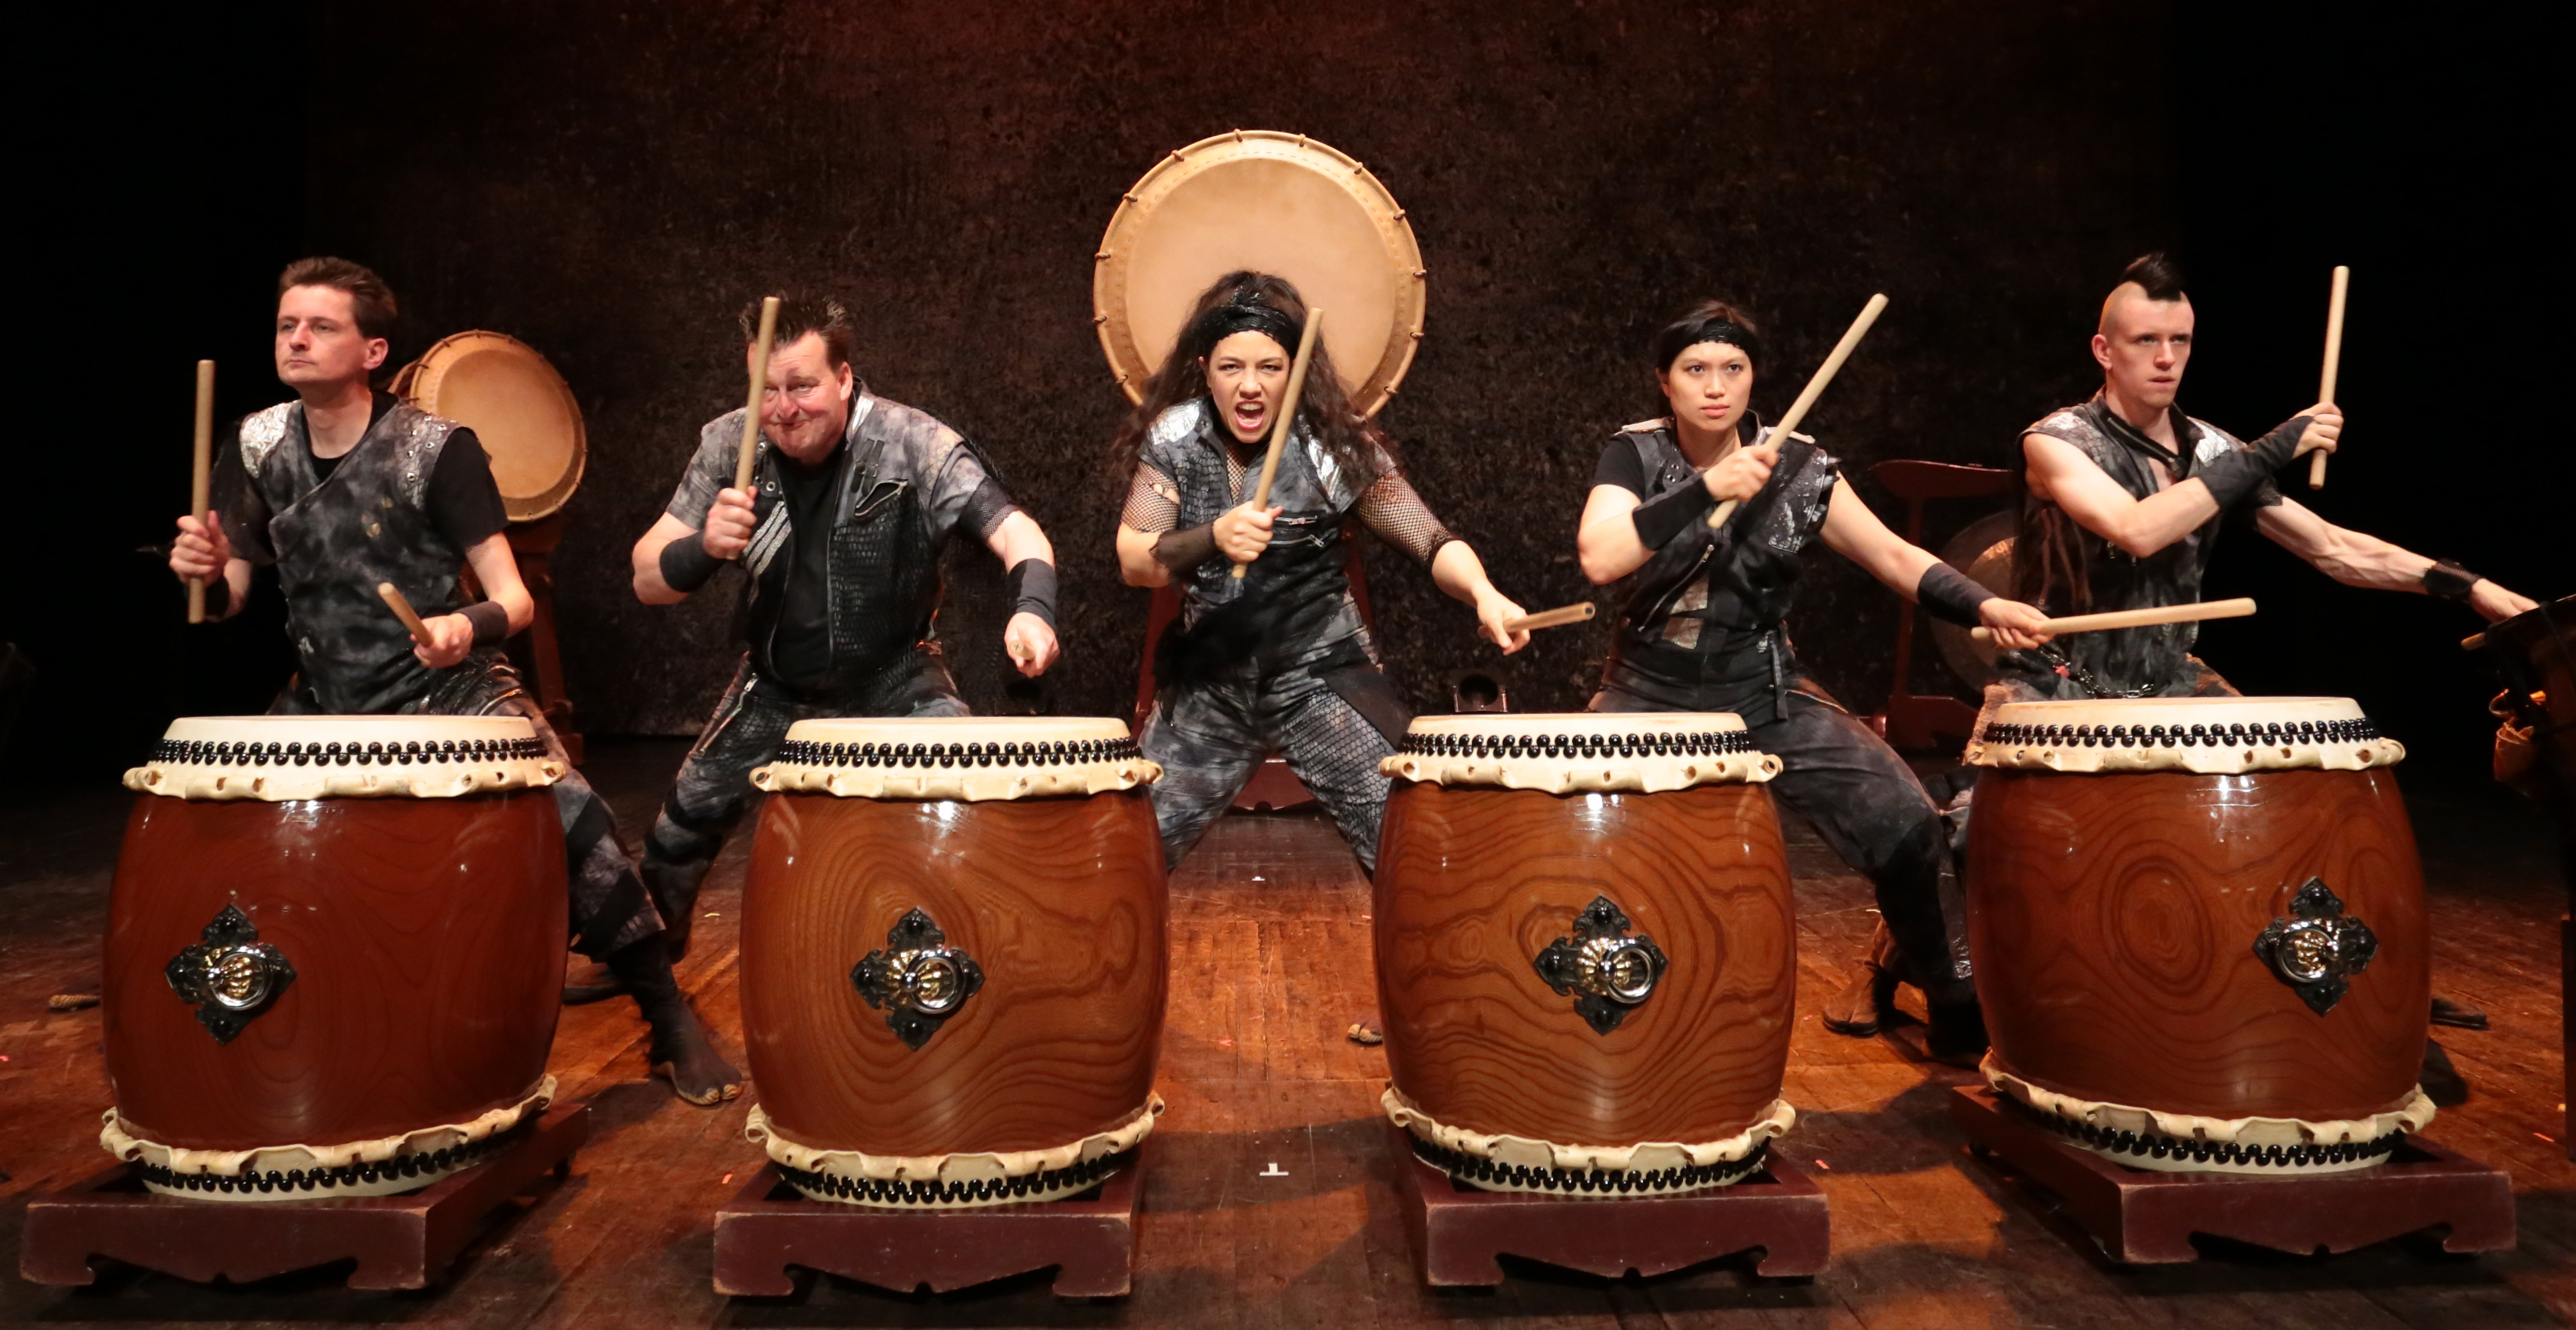 image of Mugenkyo Taiko drummers during an old show